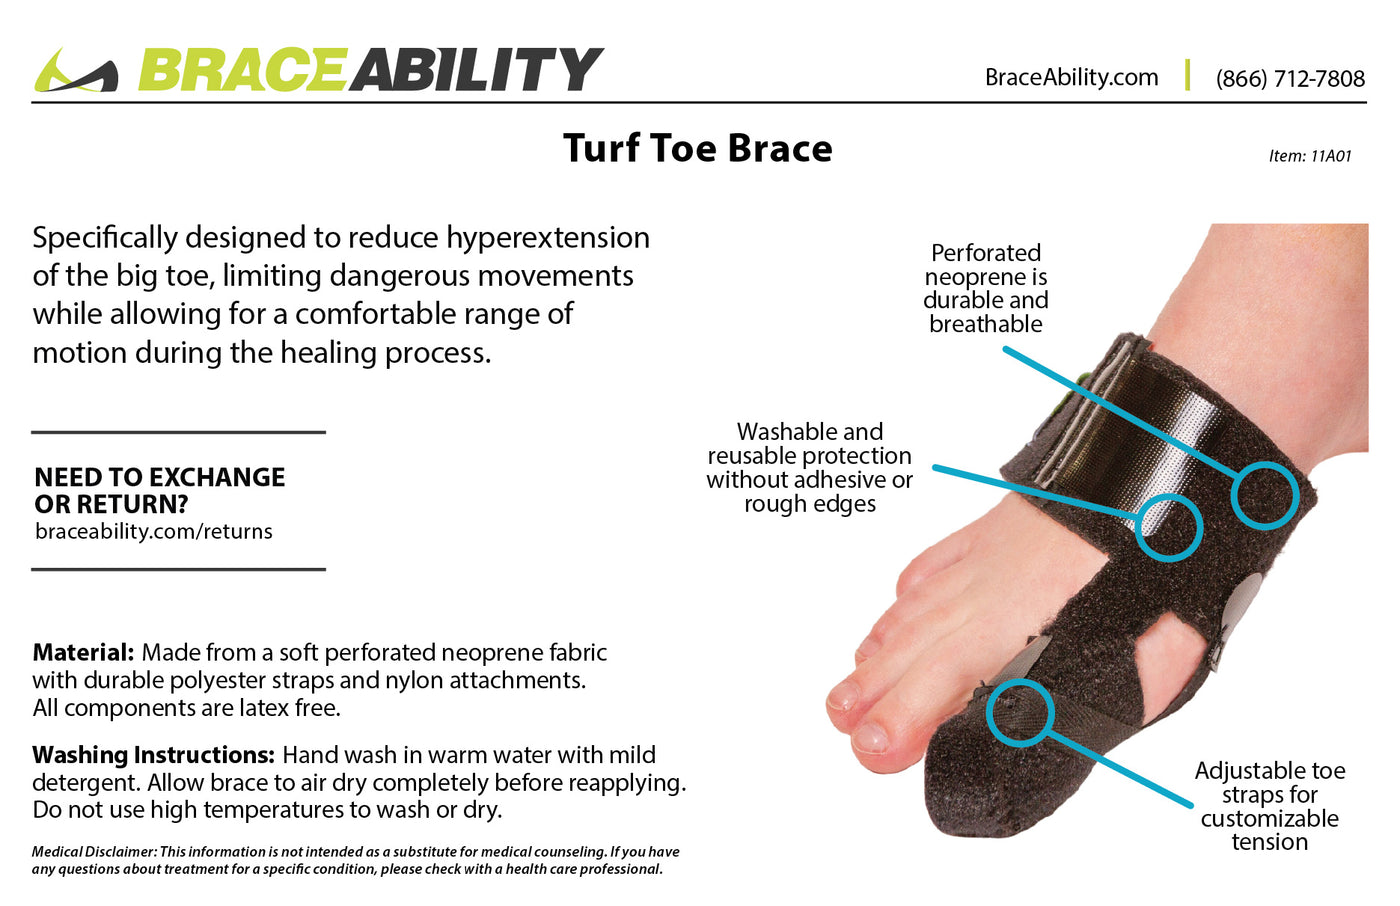 hand wash the turf toe brace in warm water with mild detergent. Air dry completely before reapplying